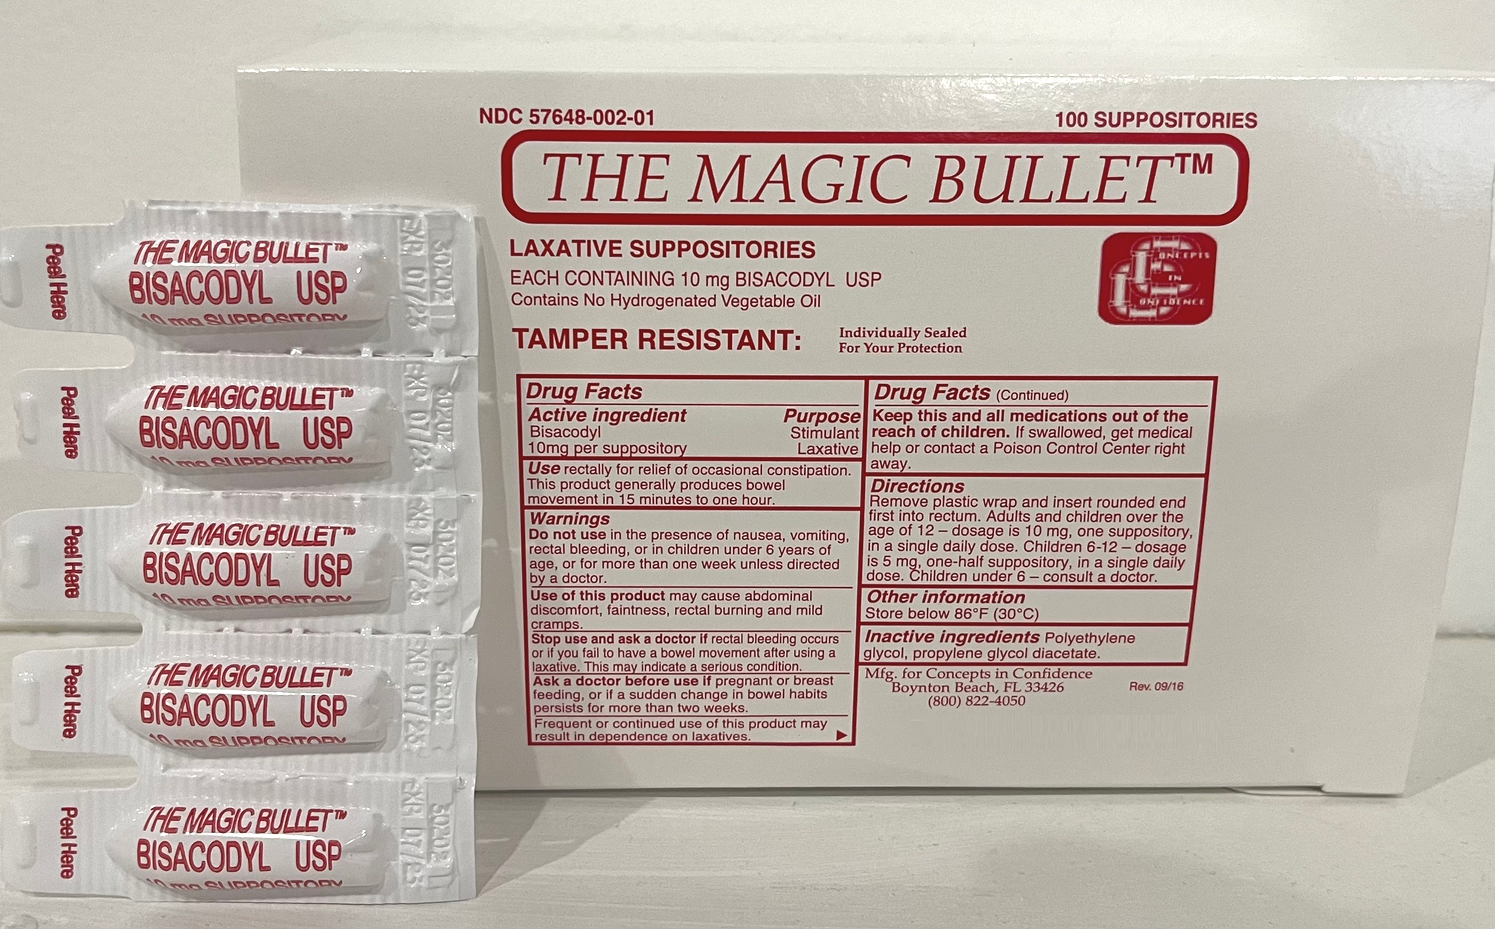  Magic Bullet Suppository Part No. CCMB100 Concepts in